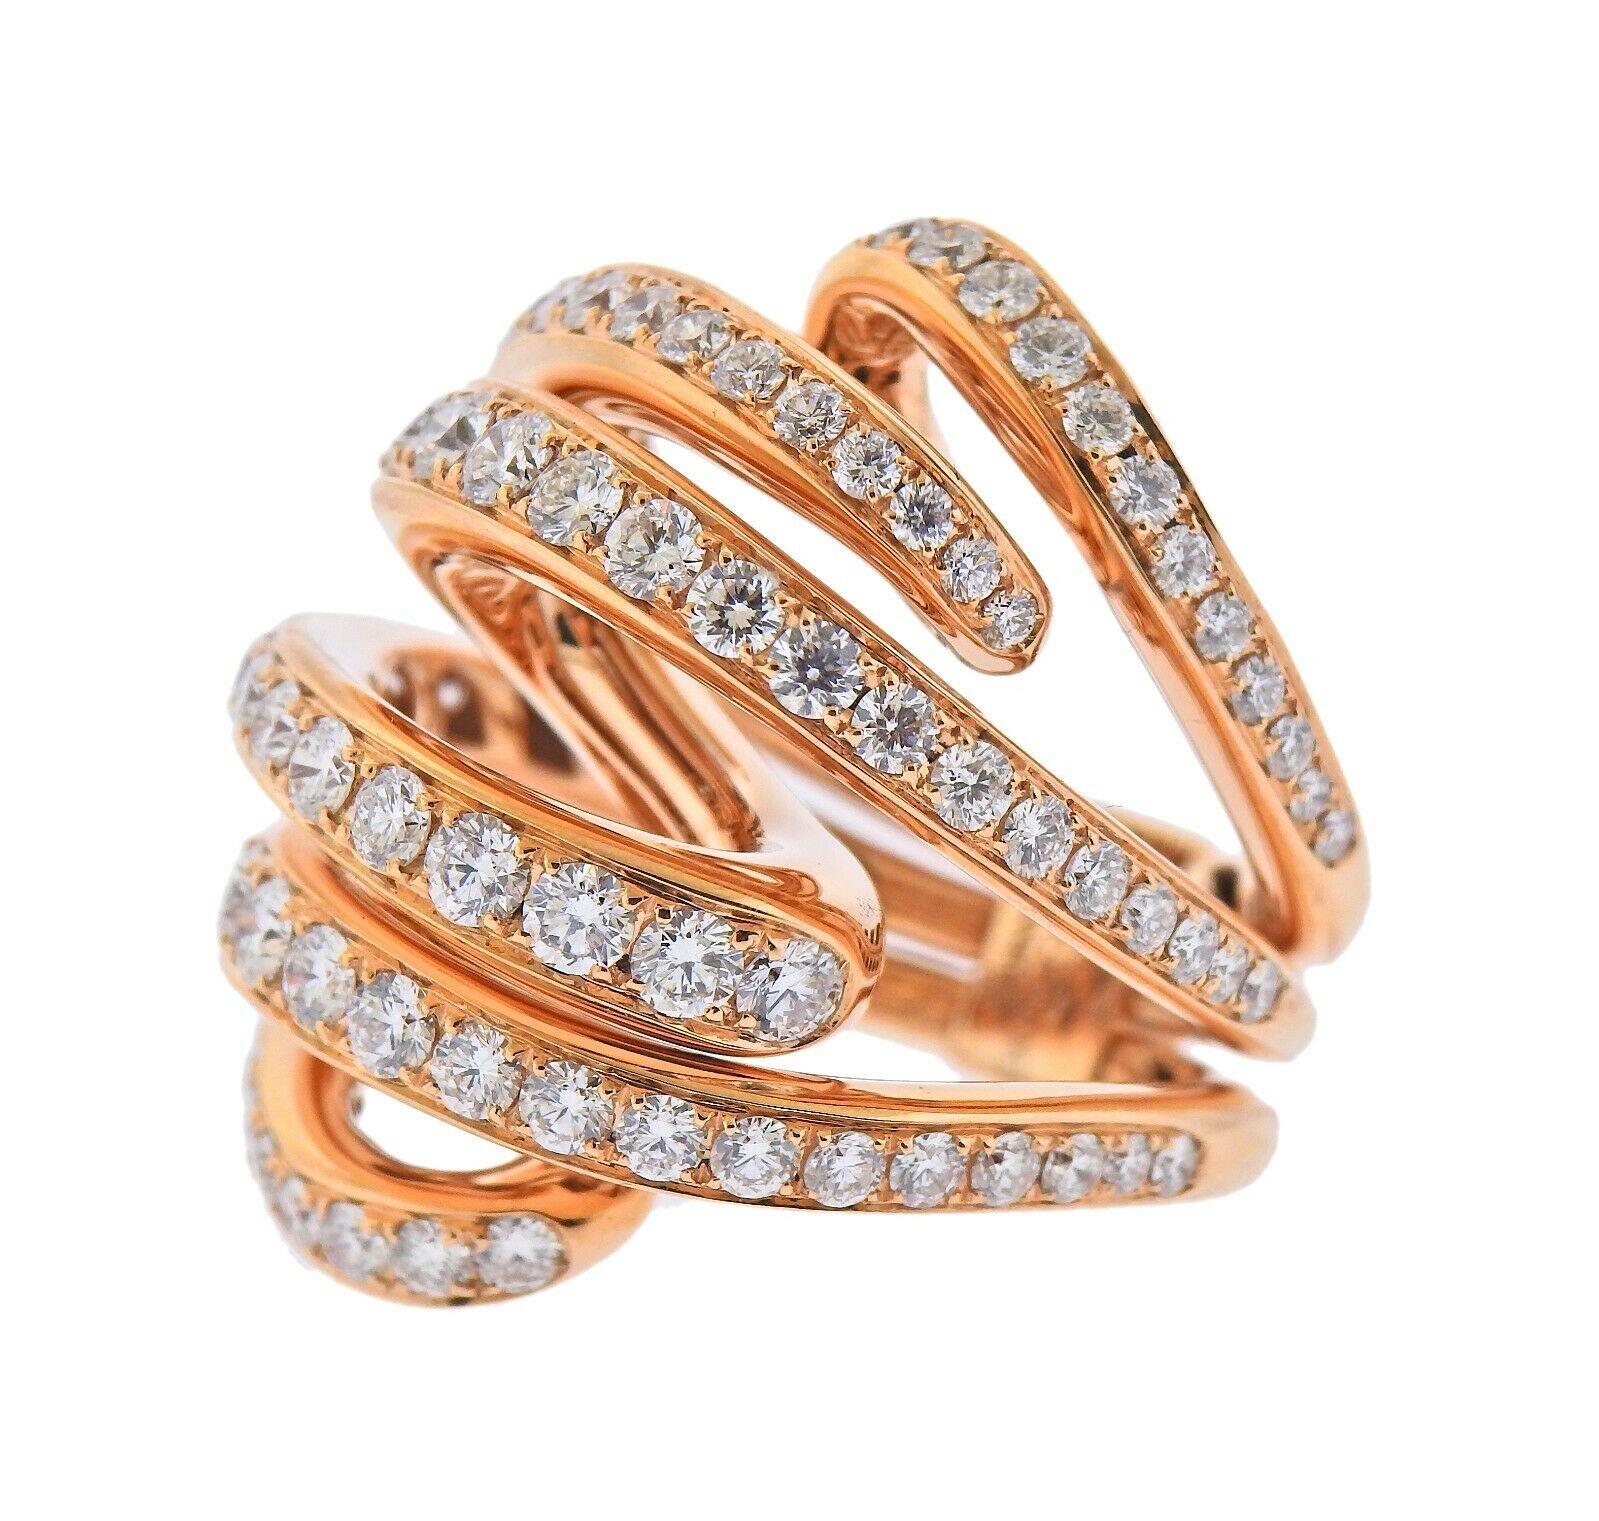 Brand new 18k rose gold Ring by De Grisogono. Set with 4.45ctw of VS/G Diamonds. Ring sizes -7.5 (55) ring top - 33mm wide. Marked - de Grisogono, Au750, B87177. Weight 29.5 grams. Ring comes with COA, booklet and box. Retail $29700
